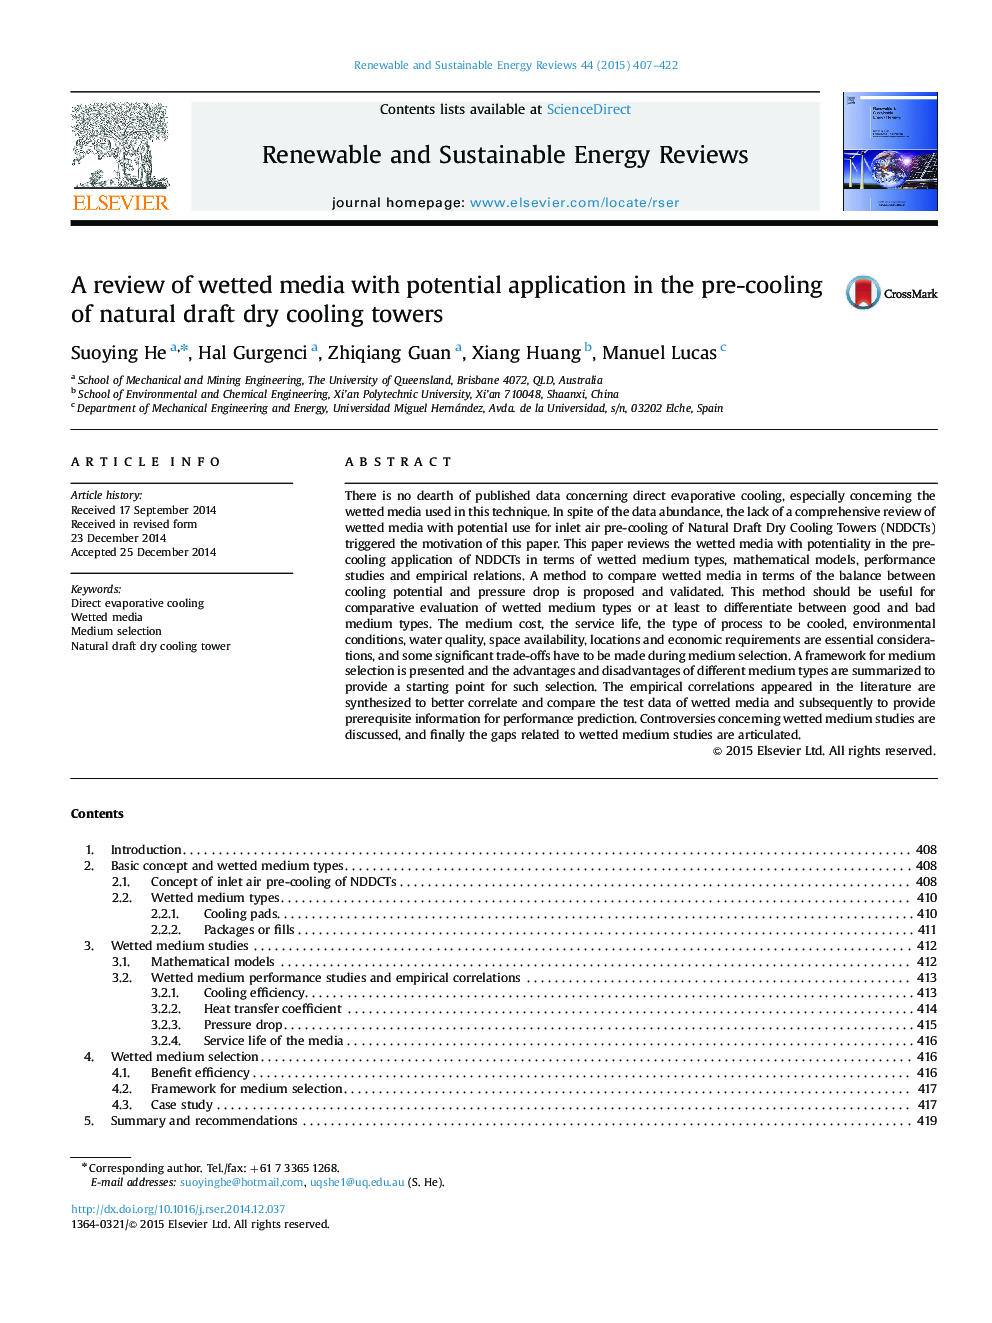 A review of wetted media with potential application in the pre-cooling of natural draft dry cooling towers